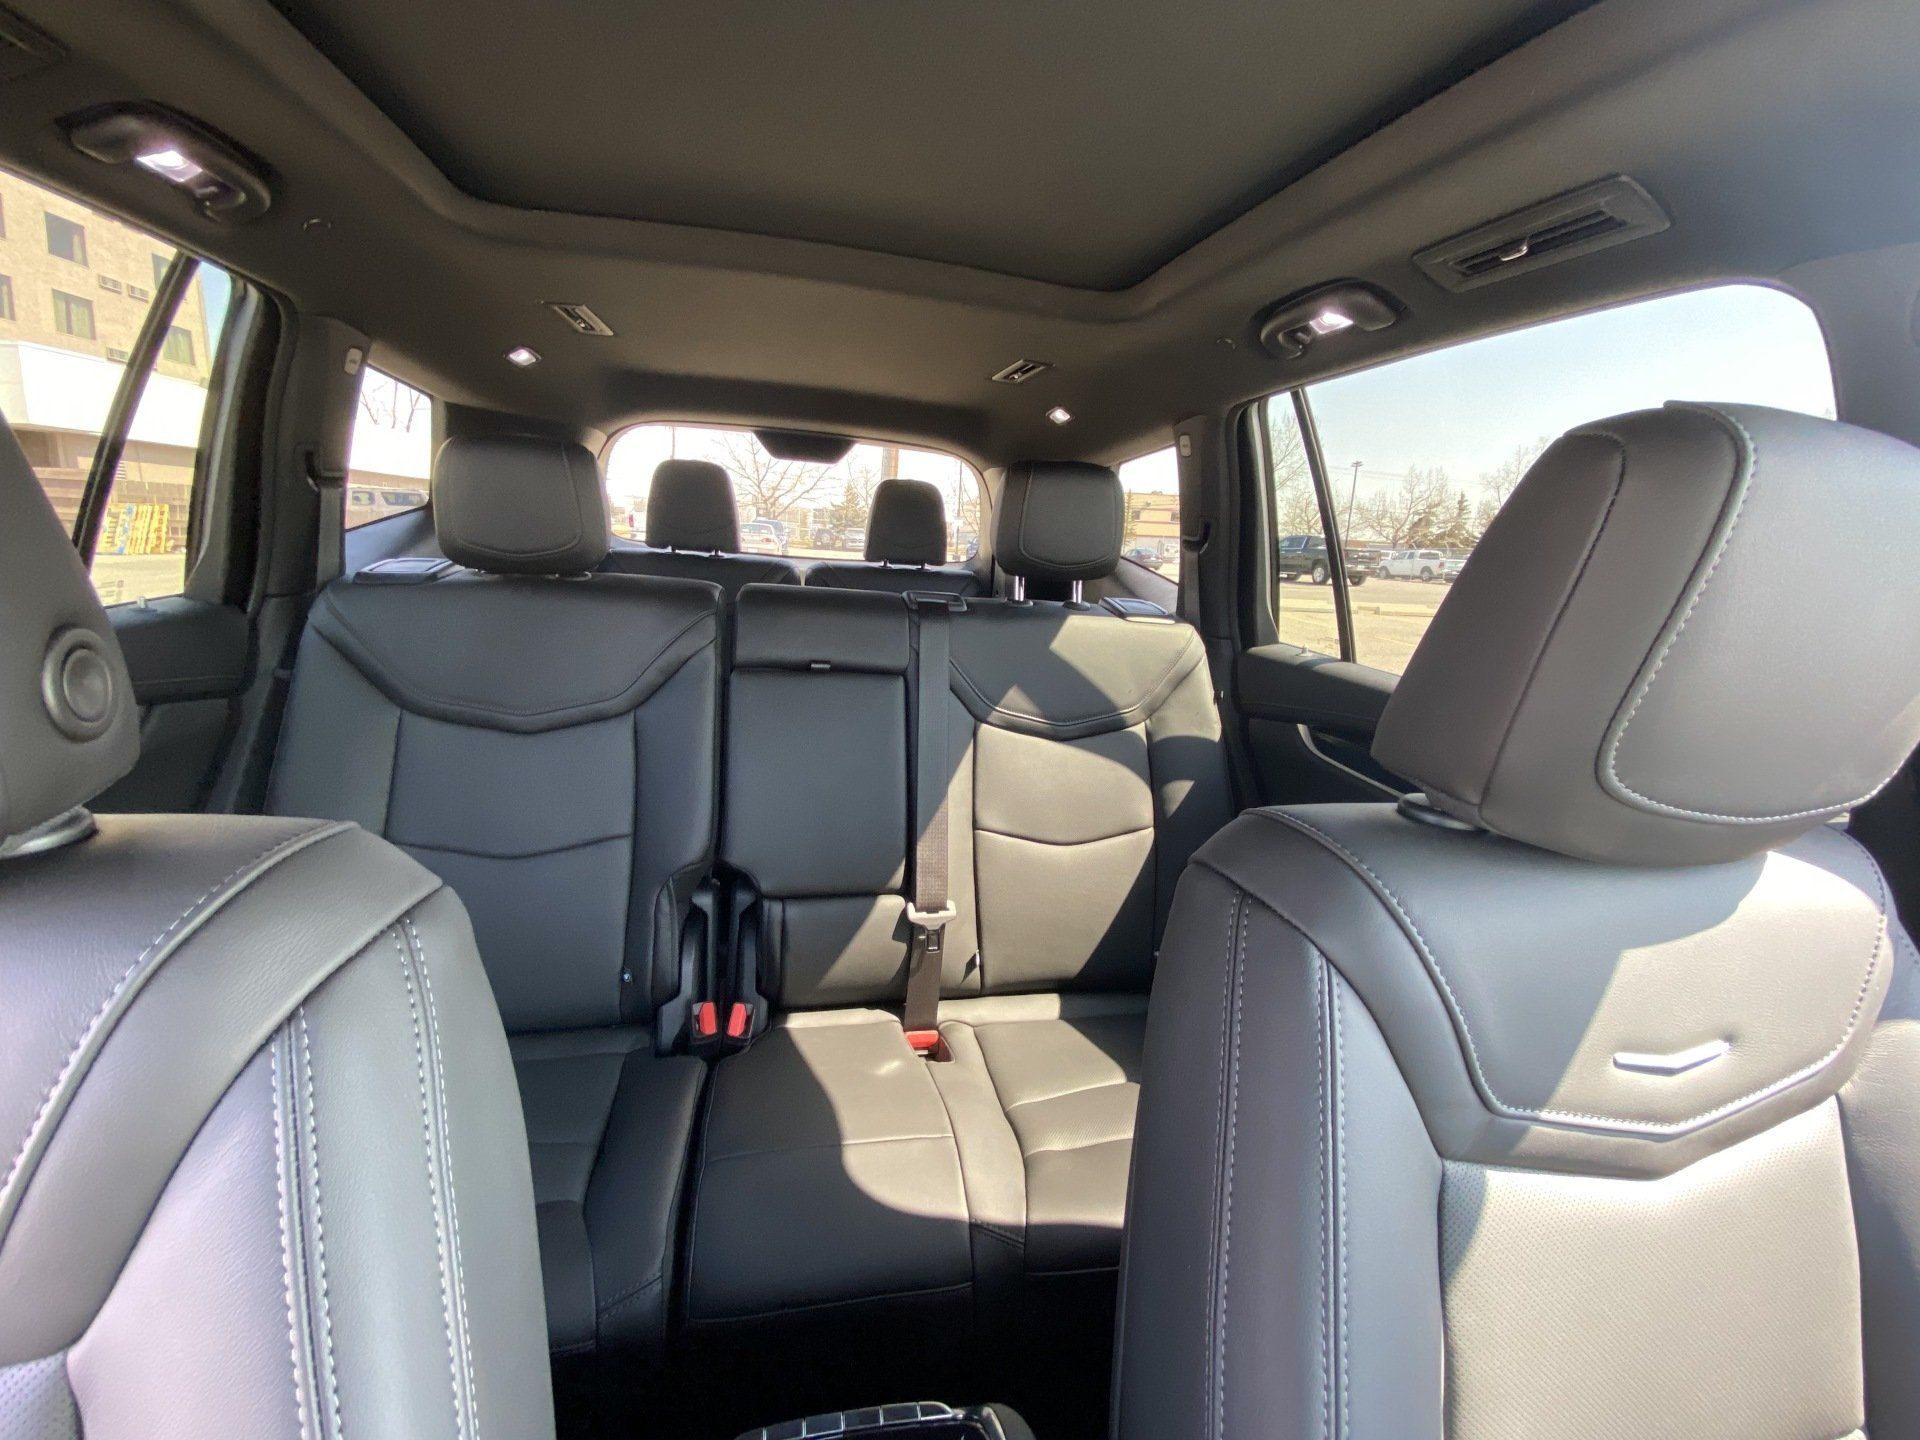 Limo To Go mid size SUV Cadillac XT6 premiere leather interior with panoramic sunroof